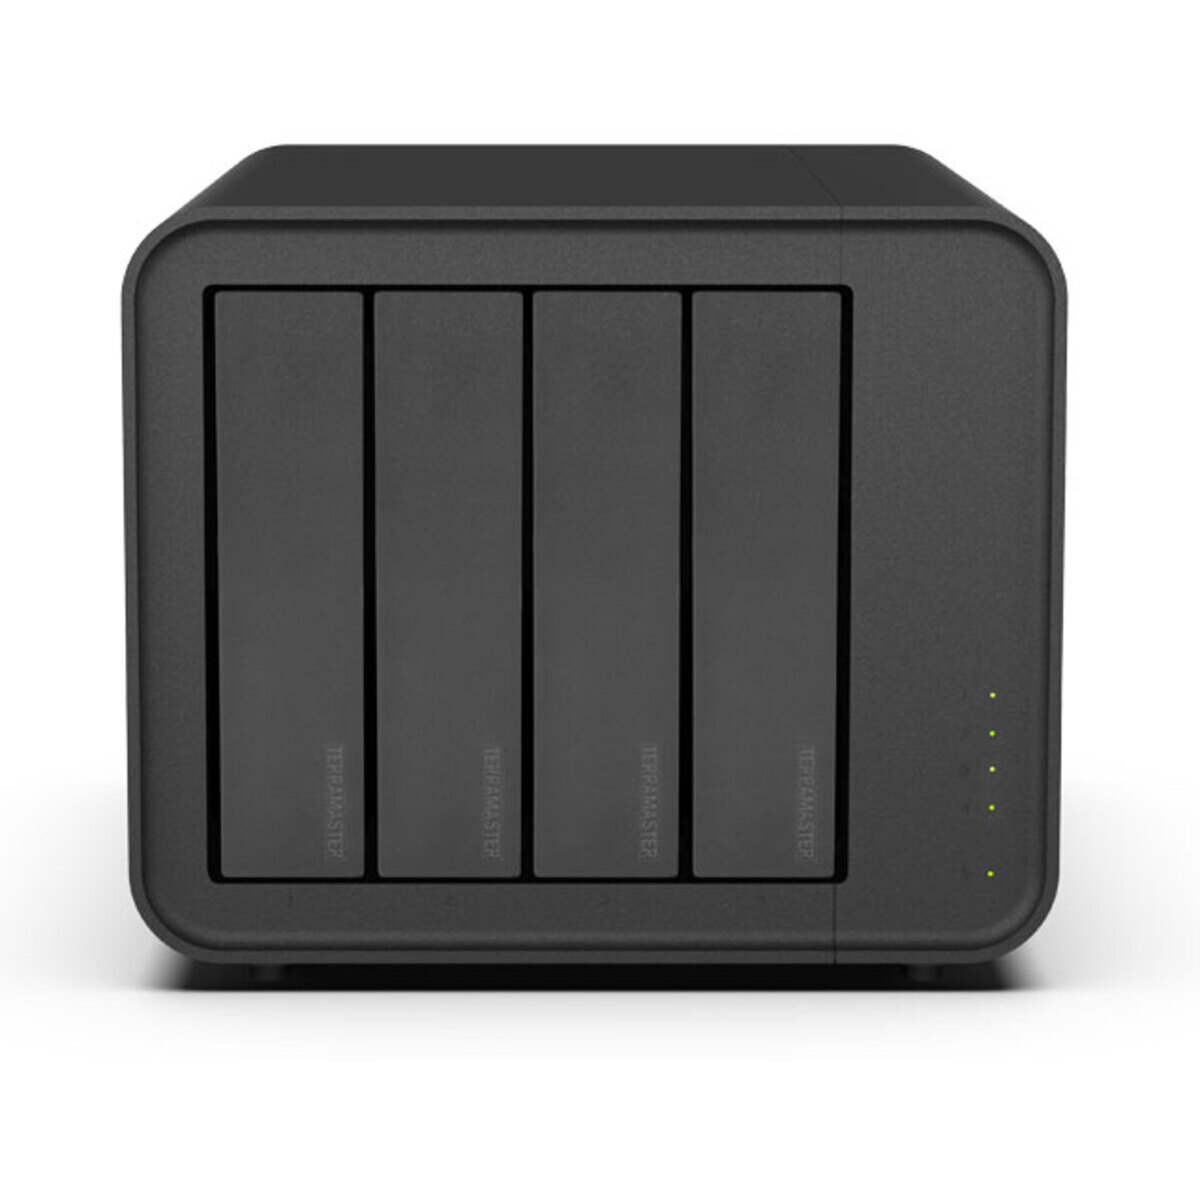 TerraMaster F4-212 4tb 4-Bay Desktop Personal / Basic Home / Small Office NAS - Network Attached Storage Device 2x2tb Sandisk Ultra 3D SDSSDH3-2T00 2.5 560/520MB/s SATA 6Gb/s SSD CONSUMER Class Drives Installed - Burn-In Tested F4-212